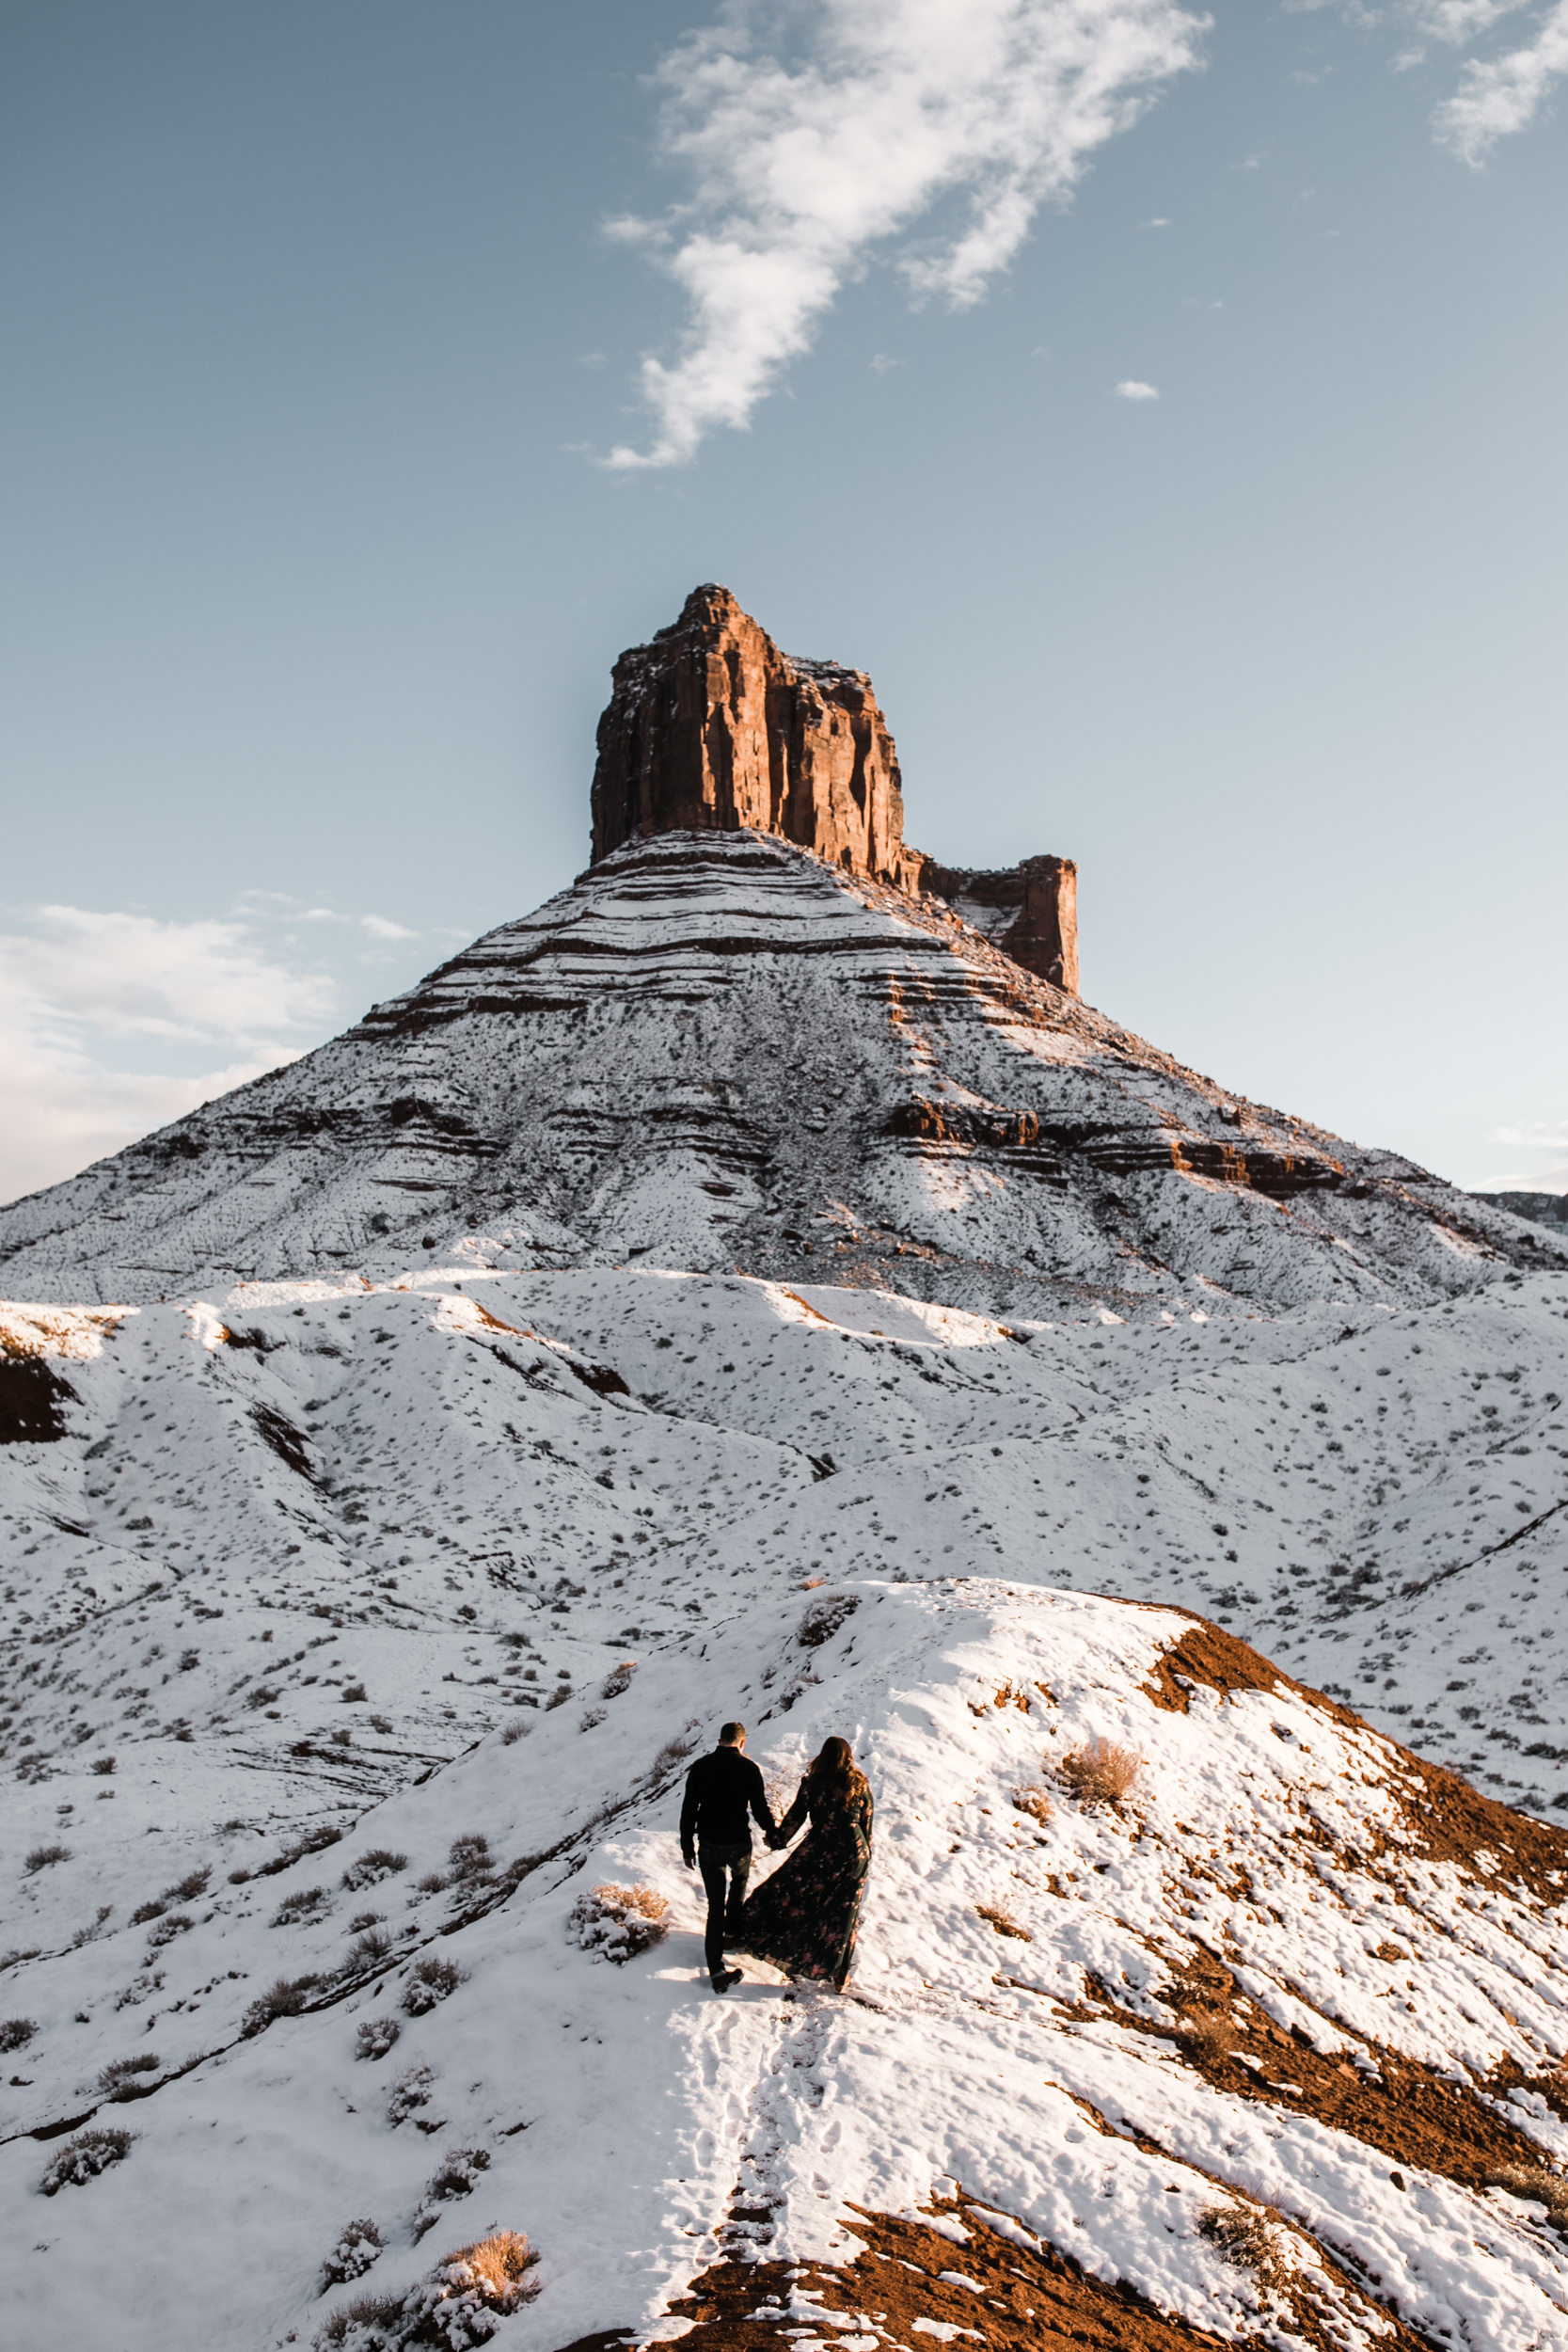 snowy engagement session in moab, utah with dogs